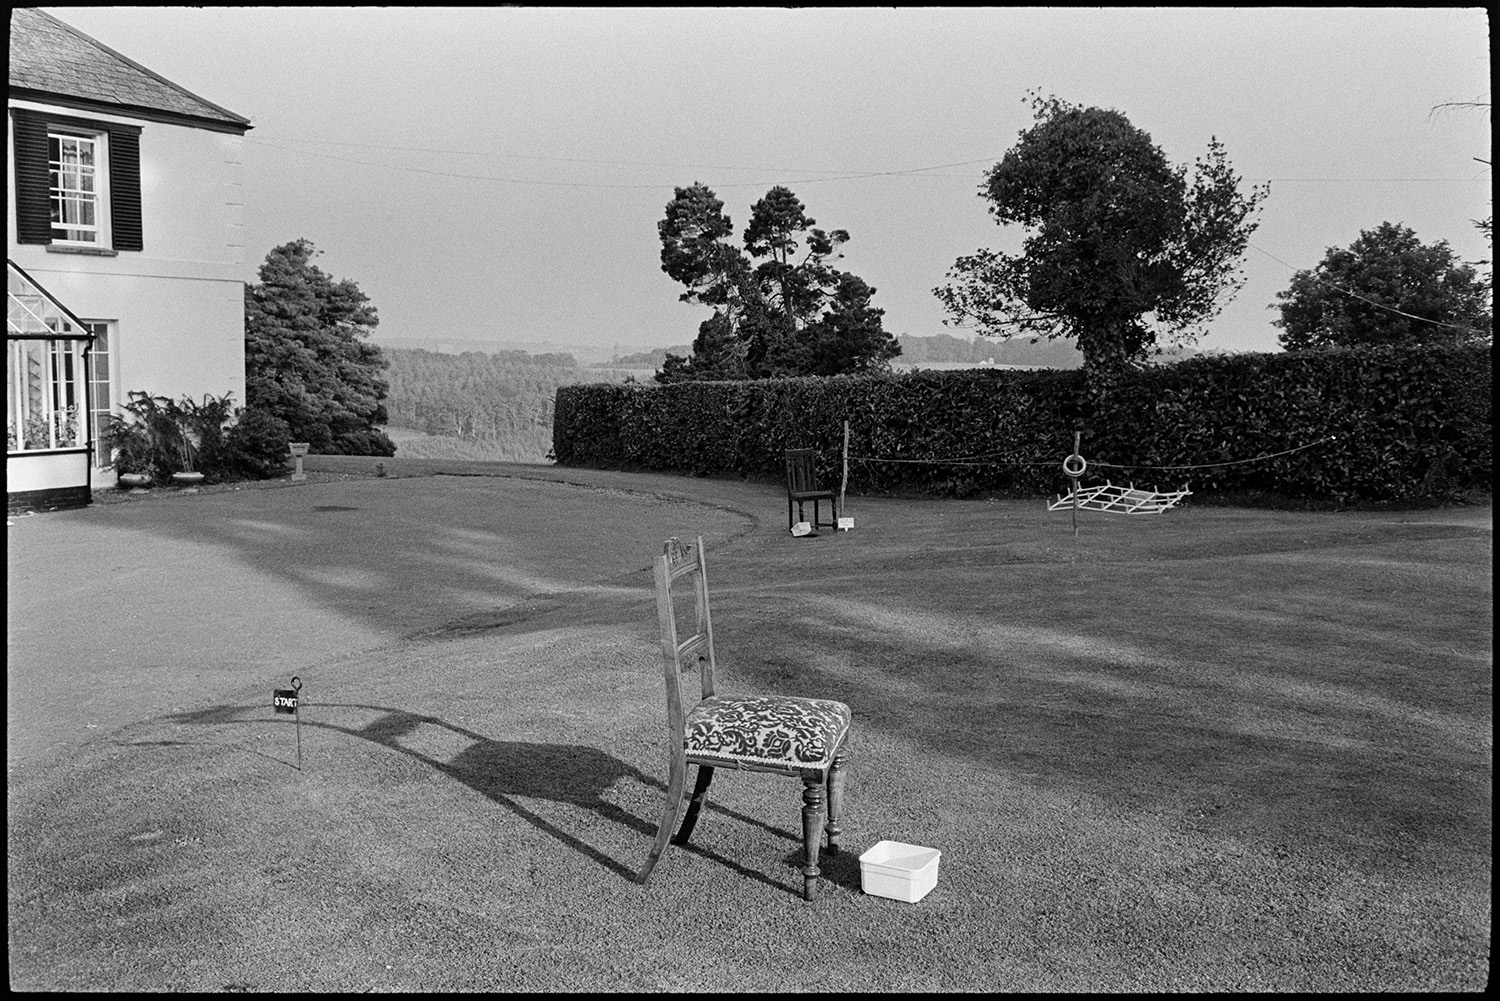 Jumble stalls at garden fete people buying.
[A chair set out for a game and a game of hoop la on the lawn at a fete at the Old Rectory, Merton. Shadows from trees and the chair are falling across the lawn.]